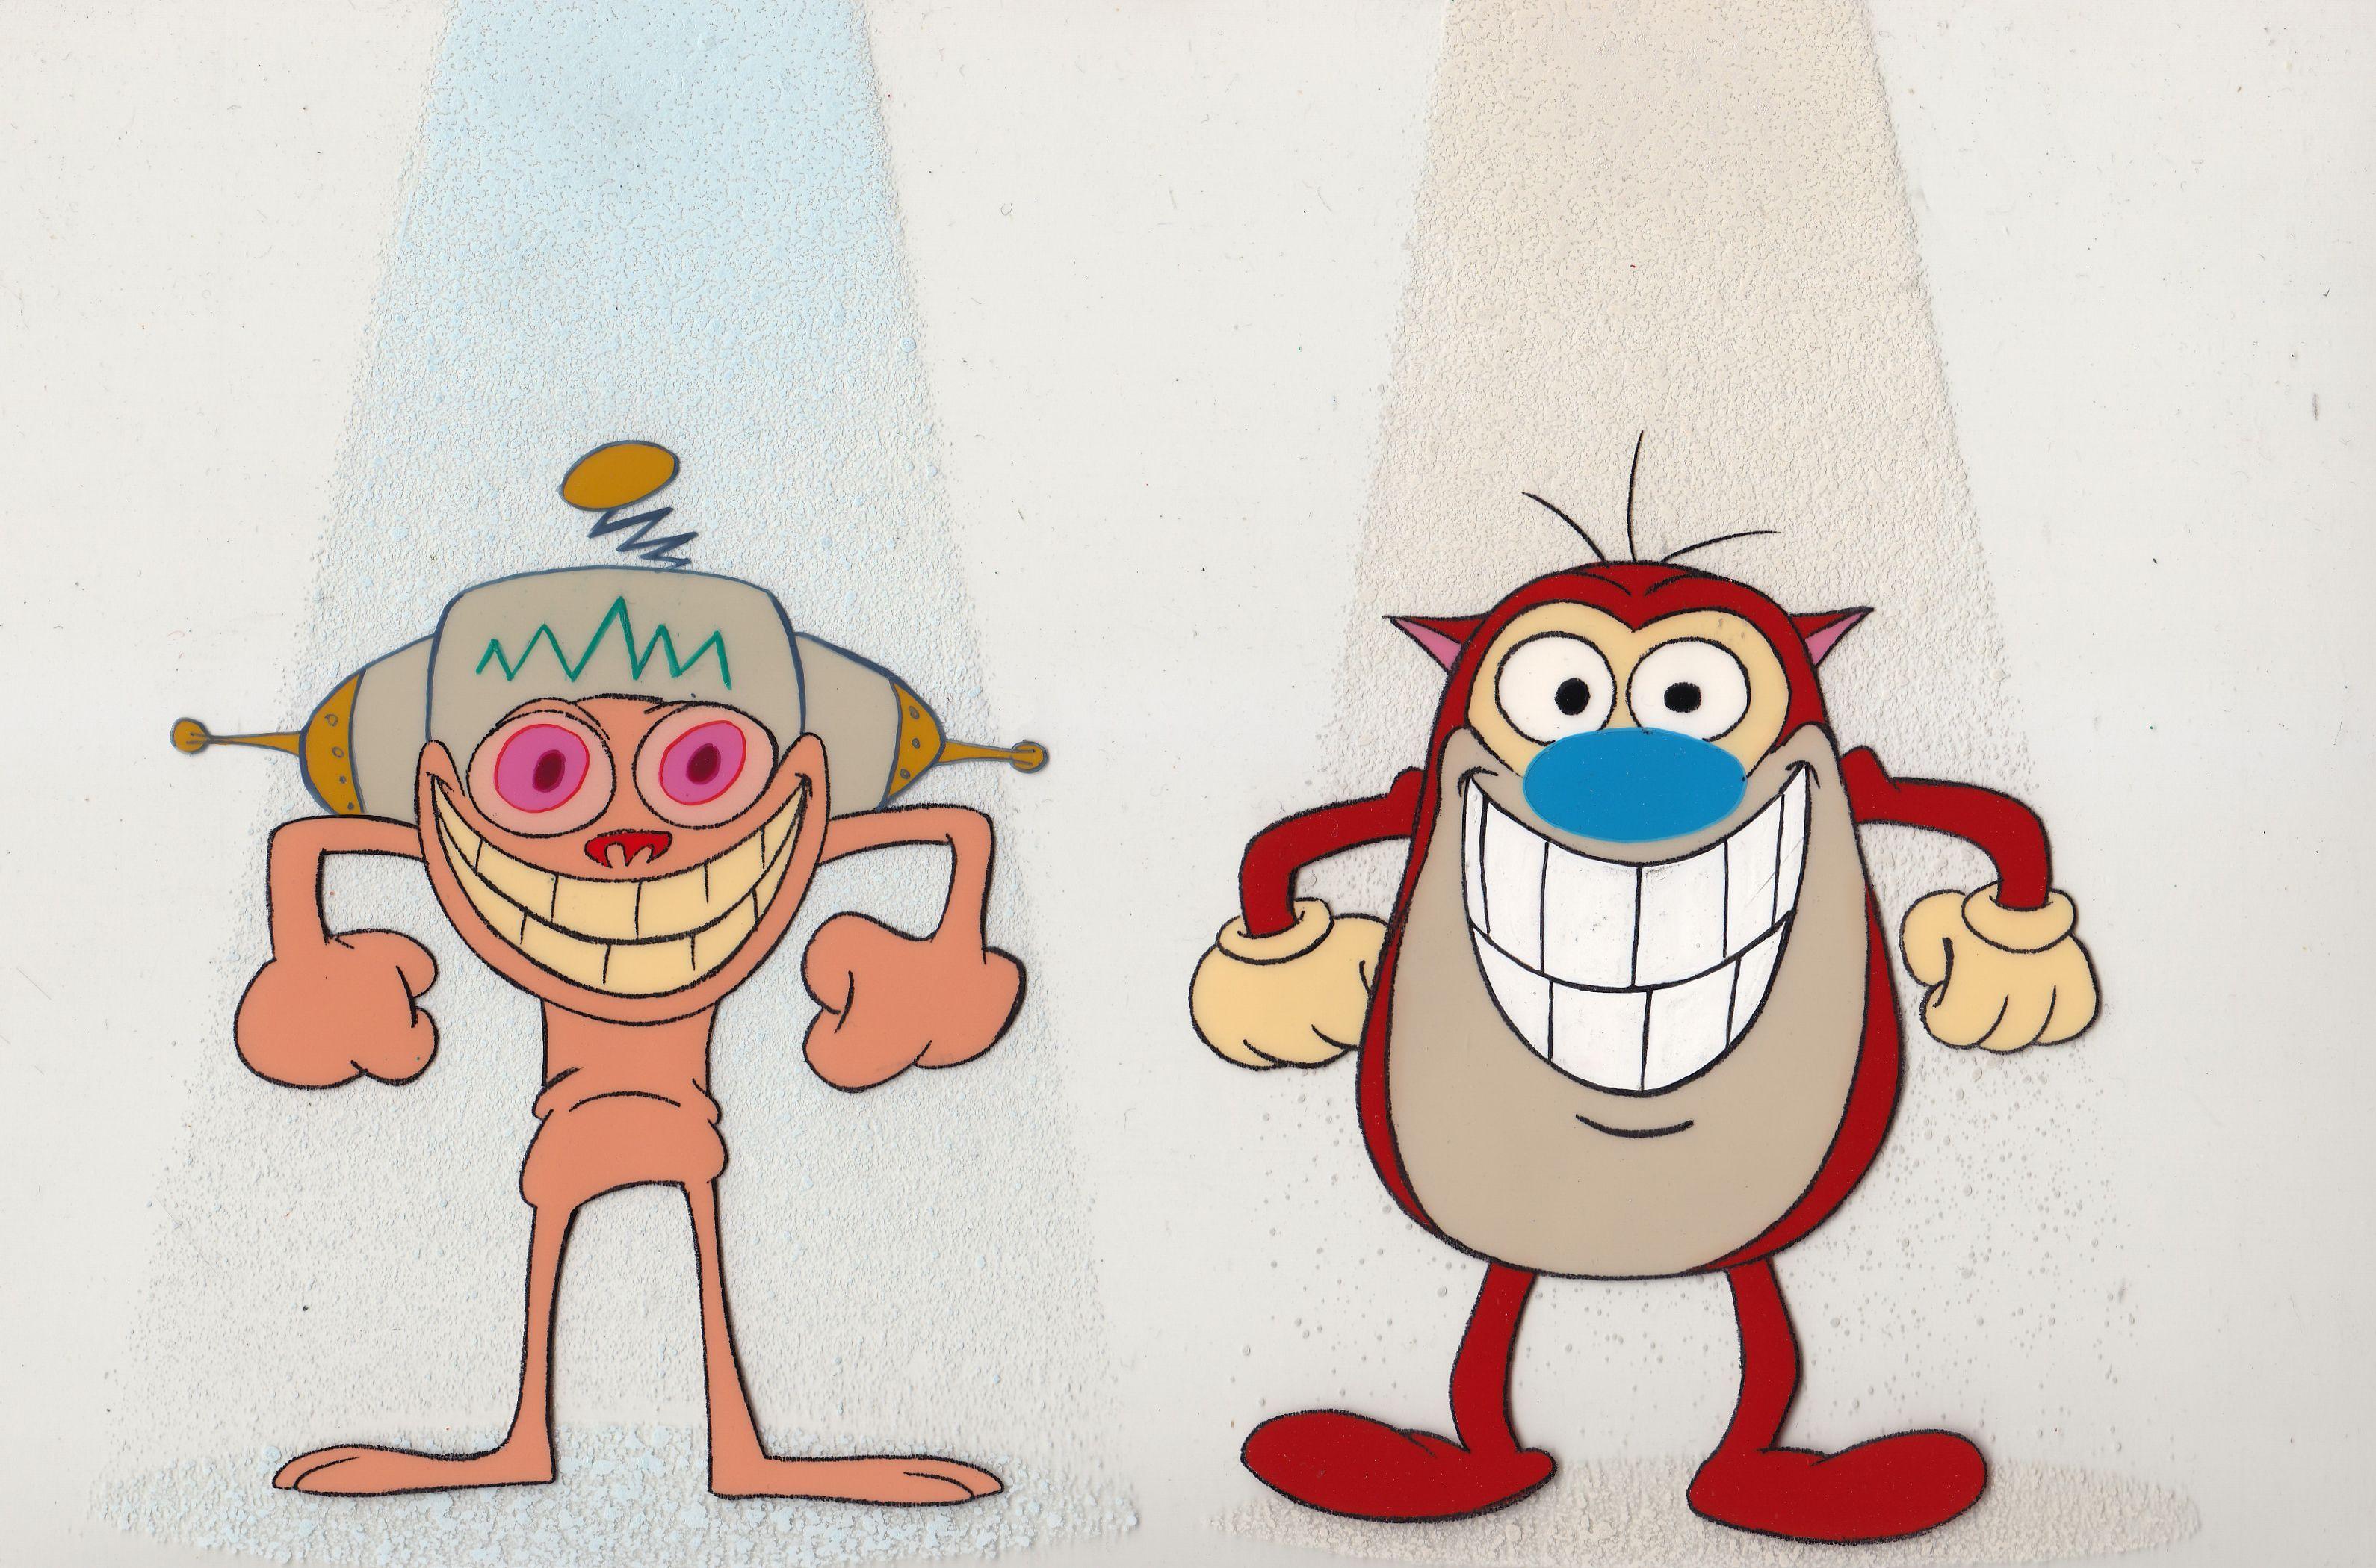 REN and STIMPY wb wallpapers x WallpaperUP.